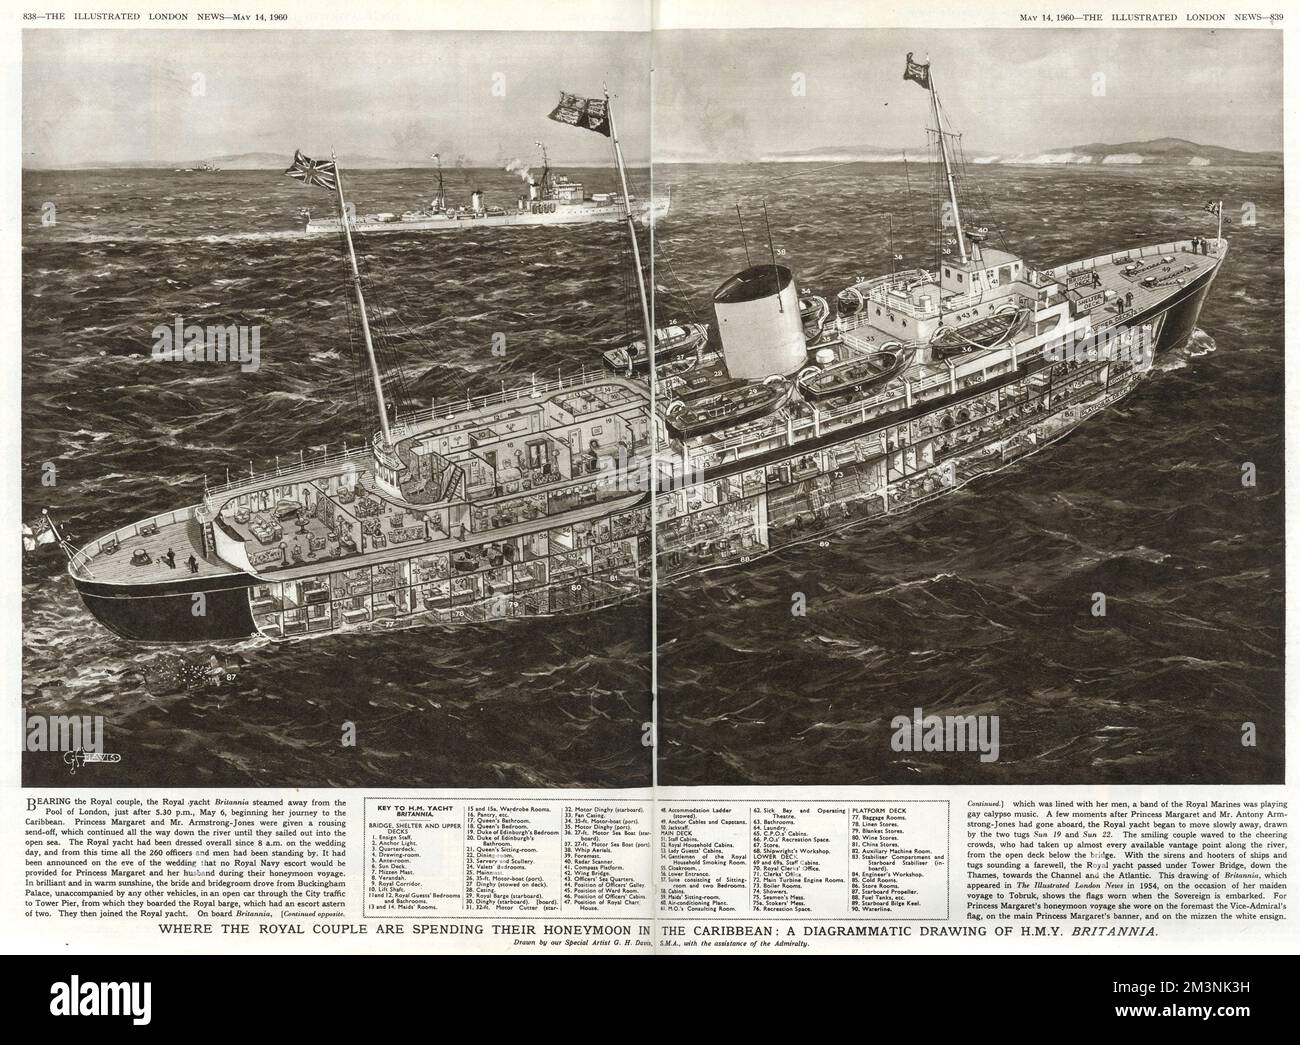 A diagrammatic drawing of H.M.V Britannia, the royal yacht, first launched in 1953 and decommissioned in 1997.  Featured in the Royal Wedding Number of The Illustrated London News in May 1960 as it was where the newly wed Princess Margaret and Anthony Armstrong Jones spent their honeymoon, sailing around the Caribbean.     Date: 1960 Stock Photo